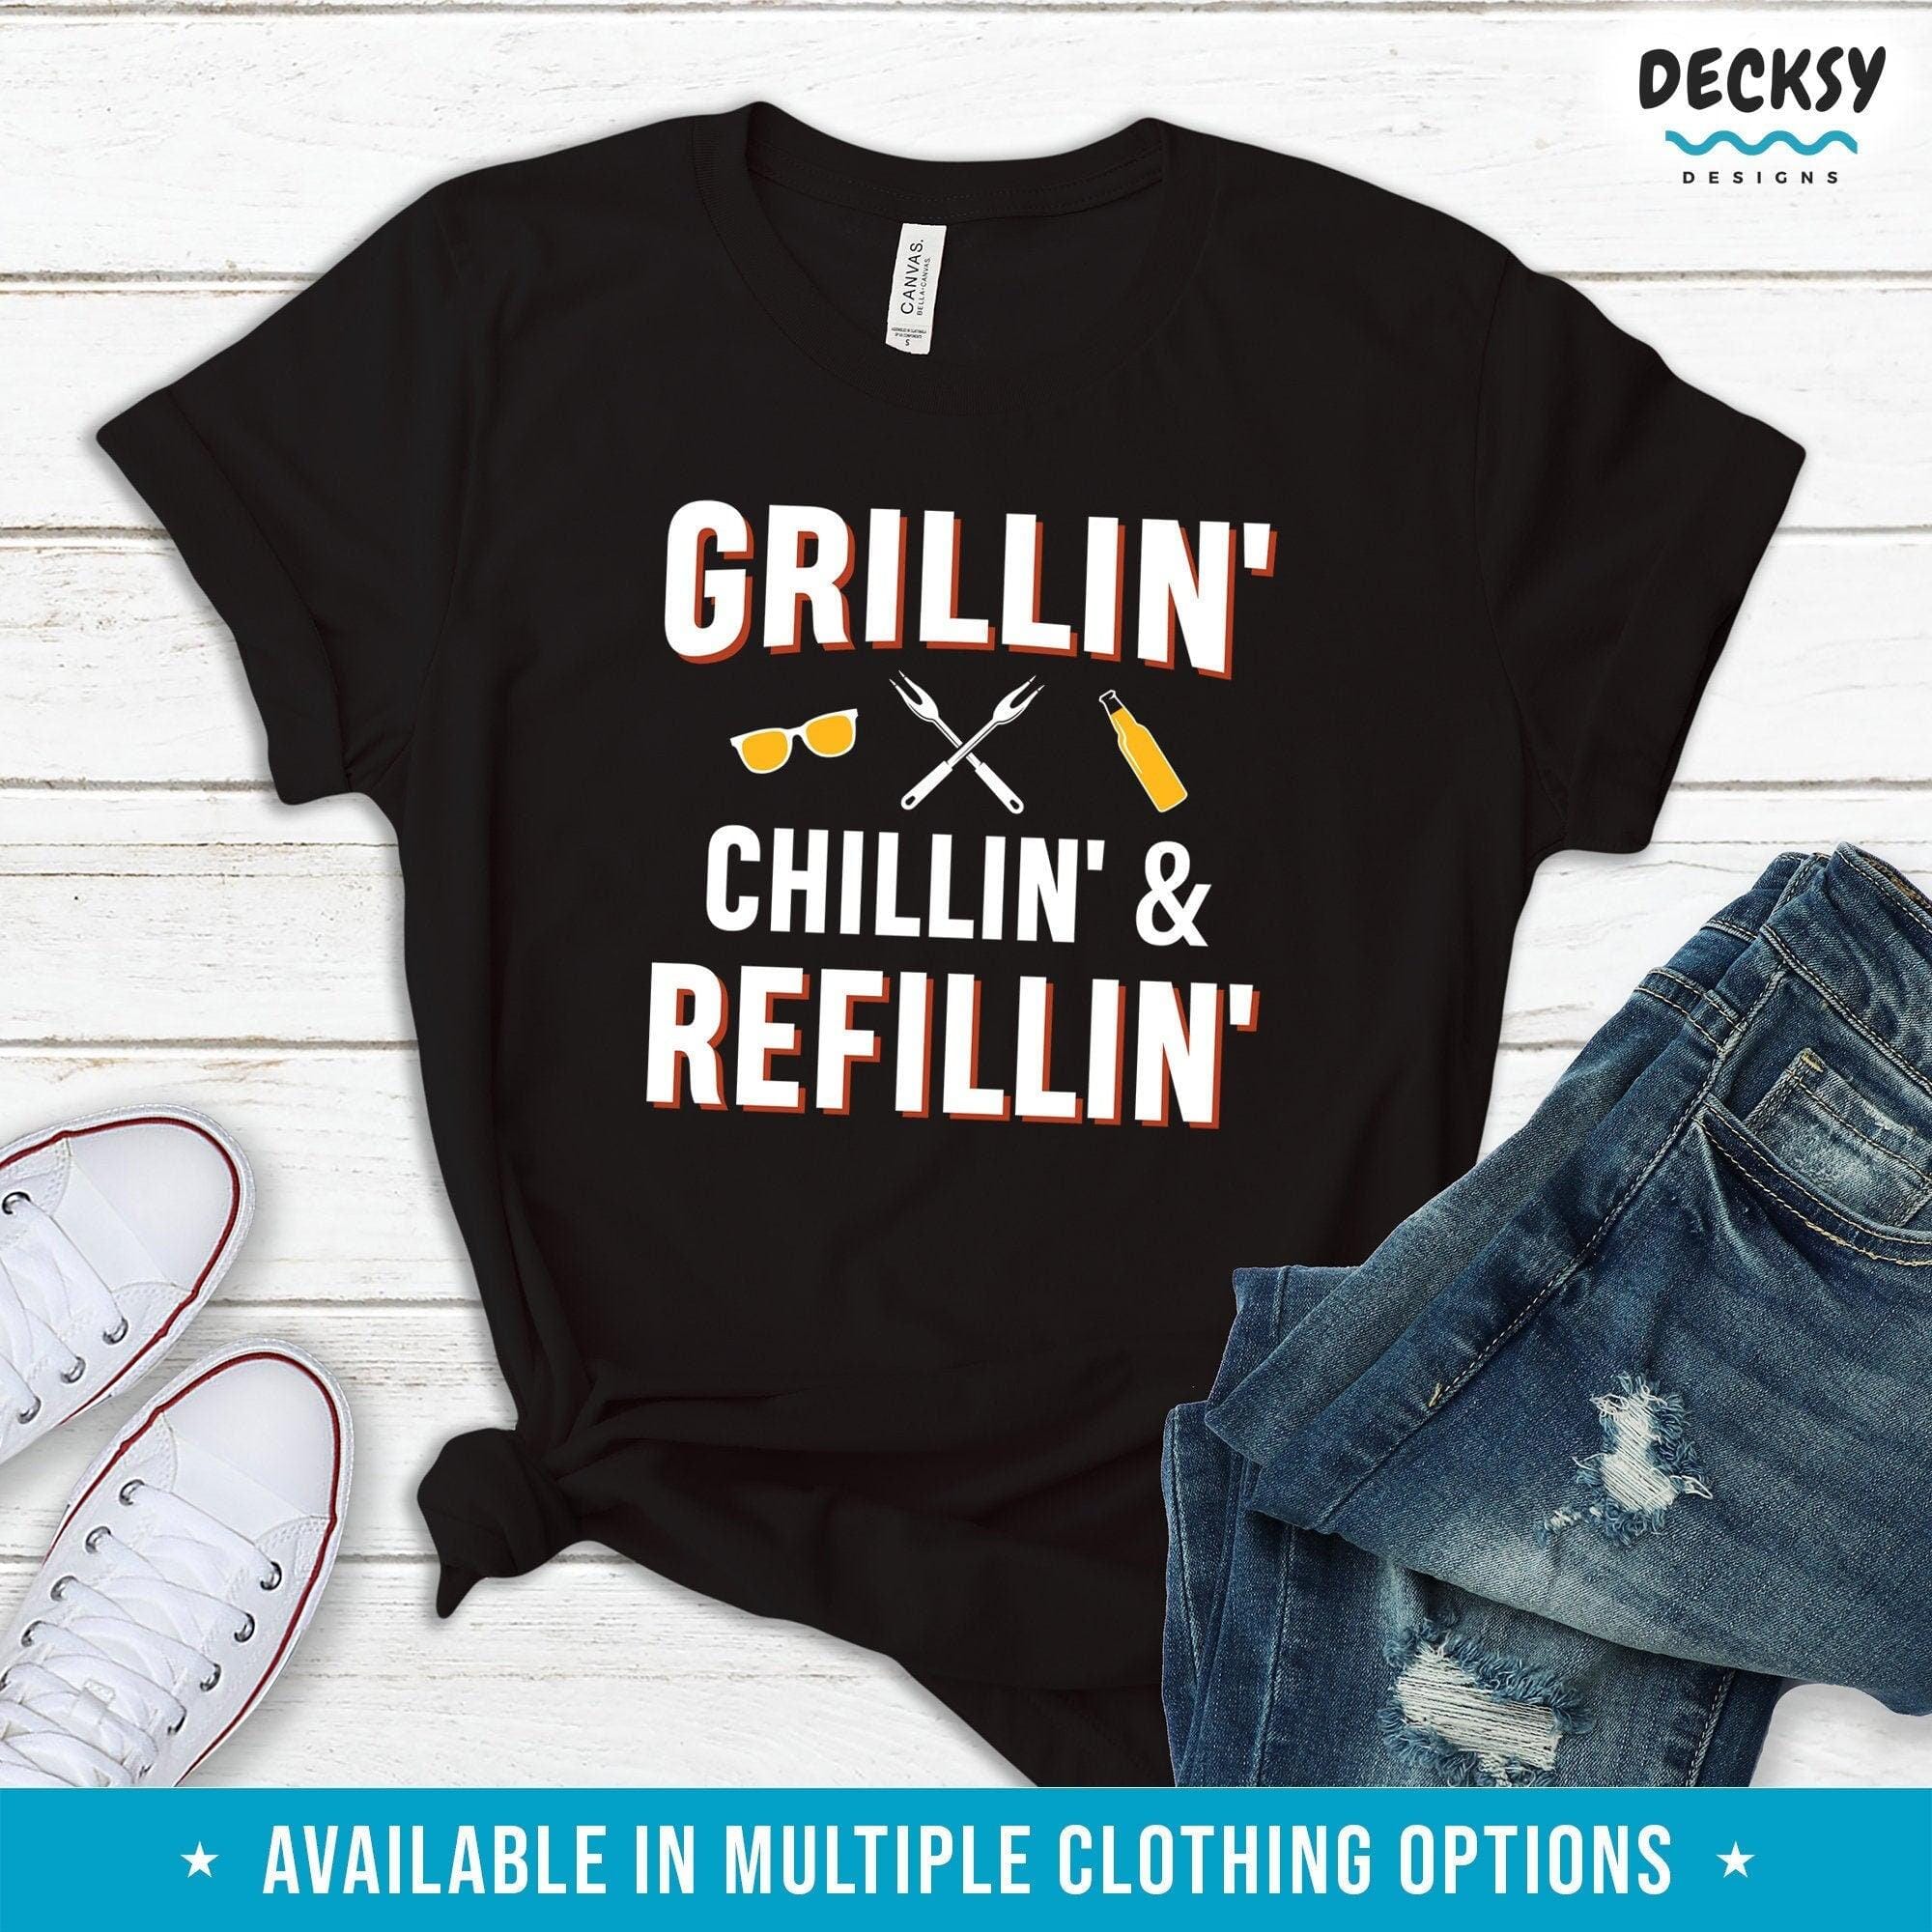 Bbq Shirt, Grill Master Gift-Clothing:Gender-Neutral Adult Clothing:Tops & Tees:T-shirts:Graphic Tees-DecksyDesigns